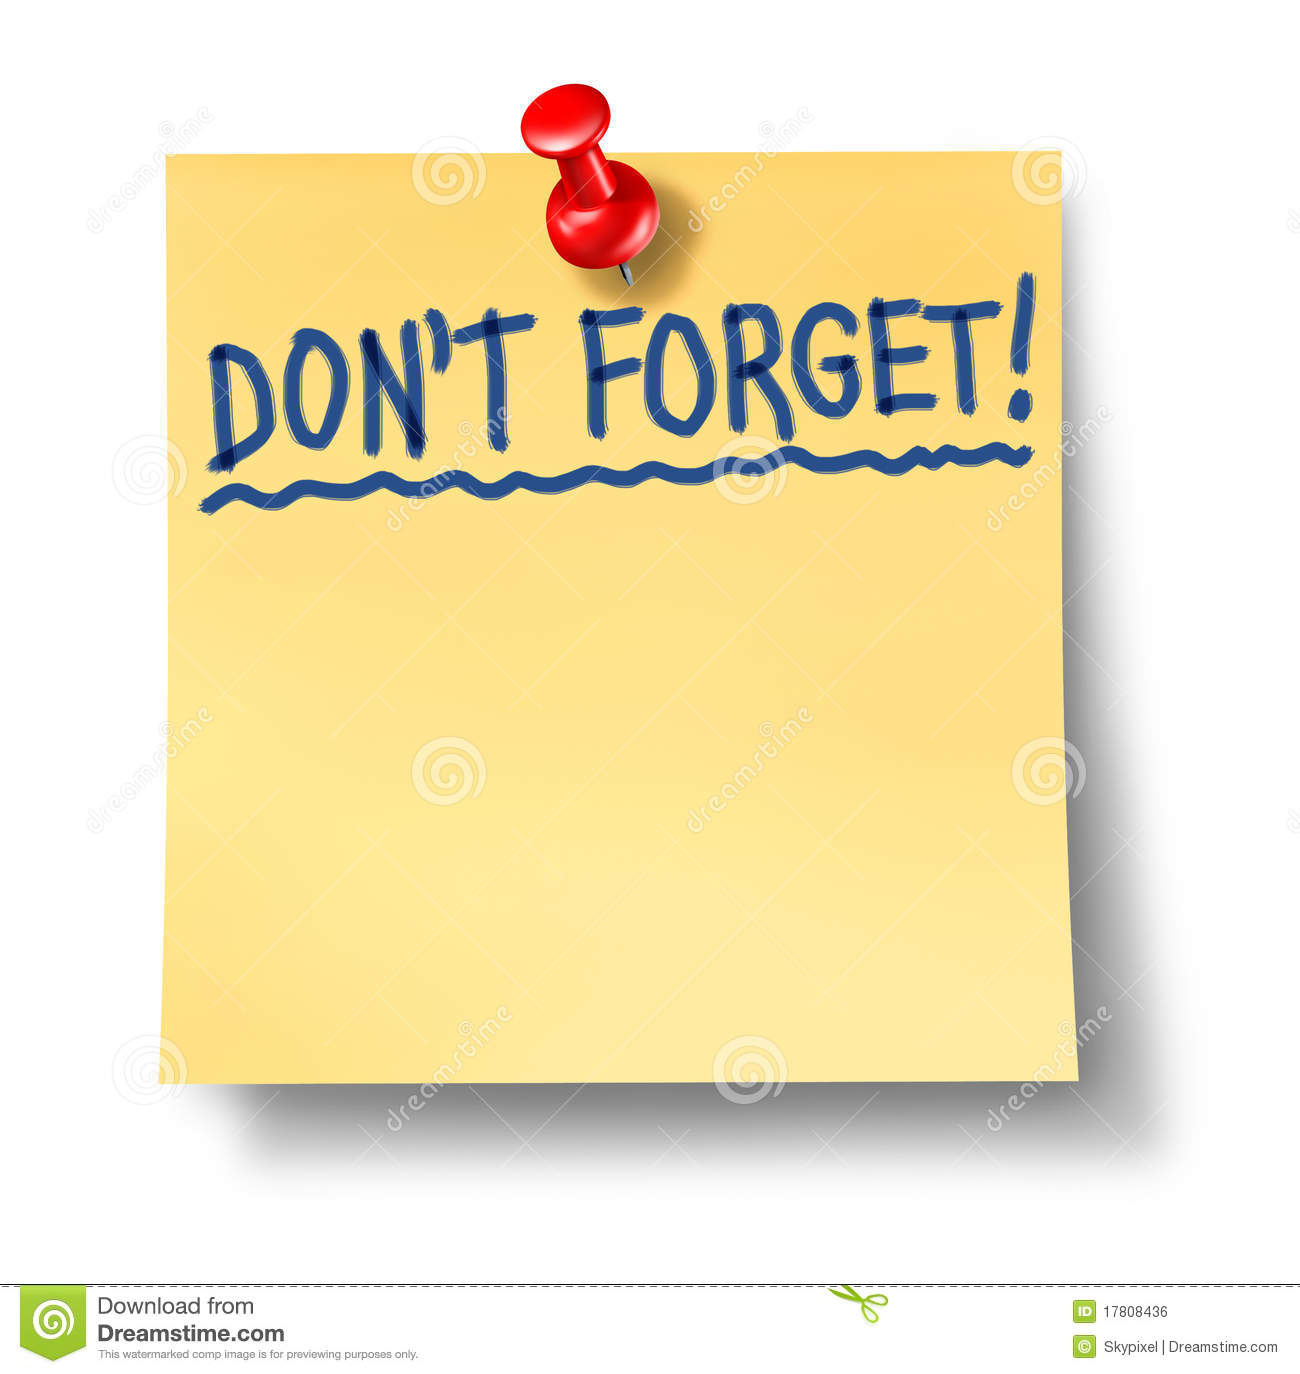 Royalty Free Stock Image  Do Not Forget Don T Reminder Alzheimers